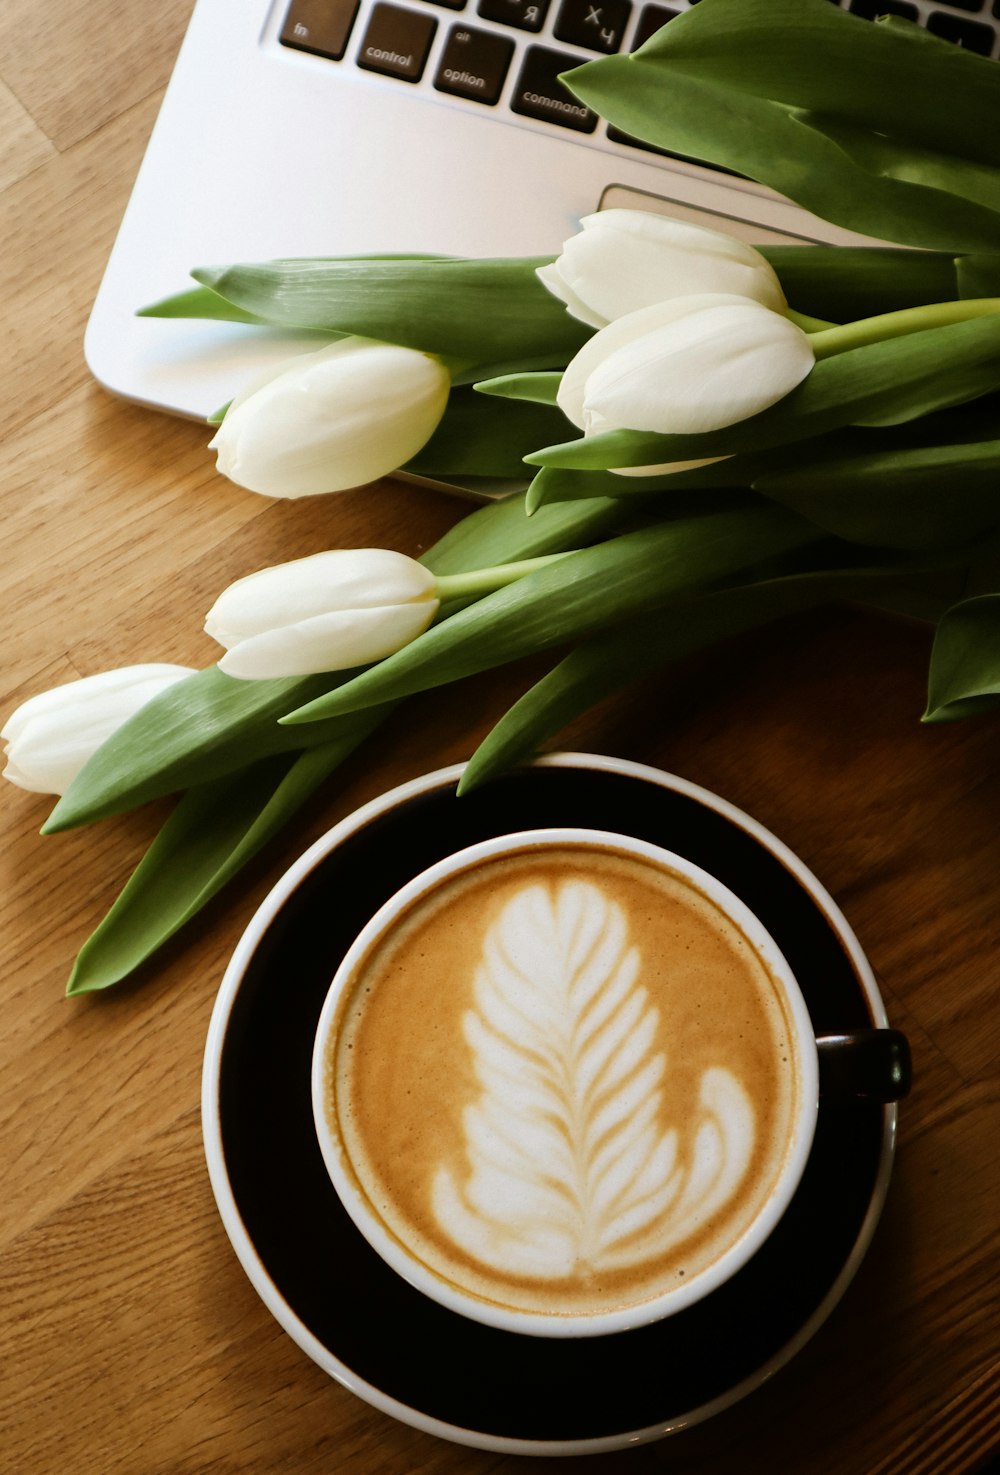 white tulips beside brown and white ceramic mug with coffee